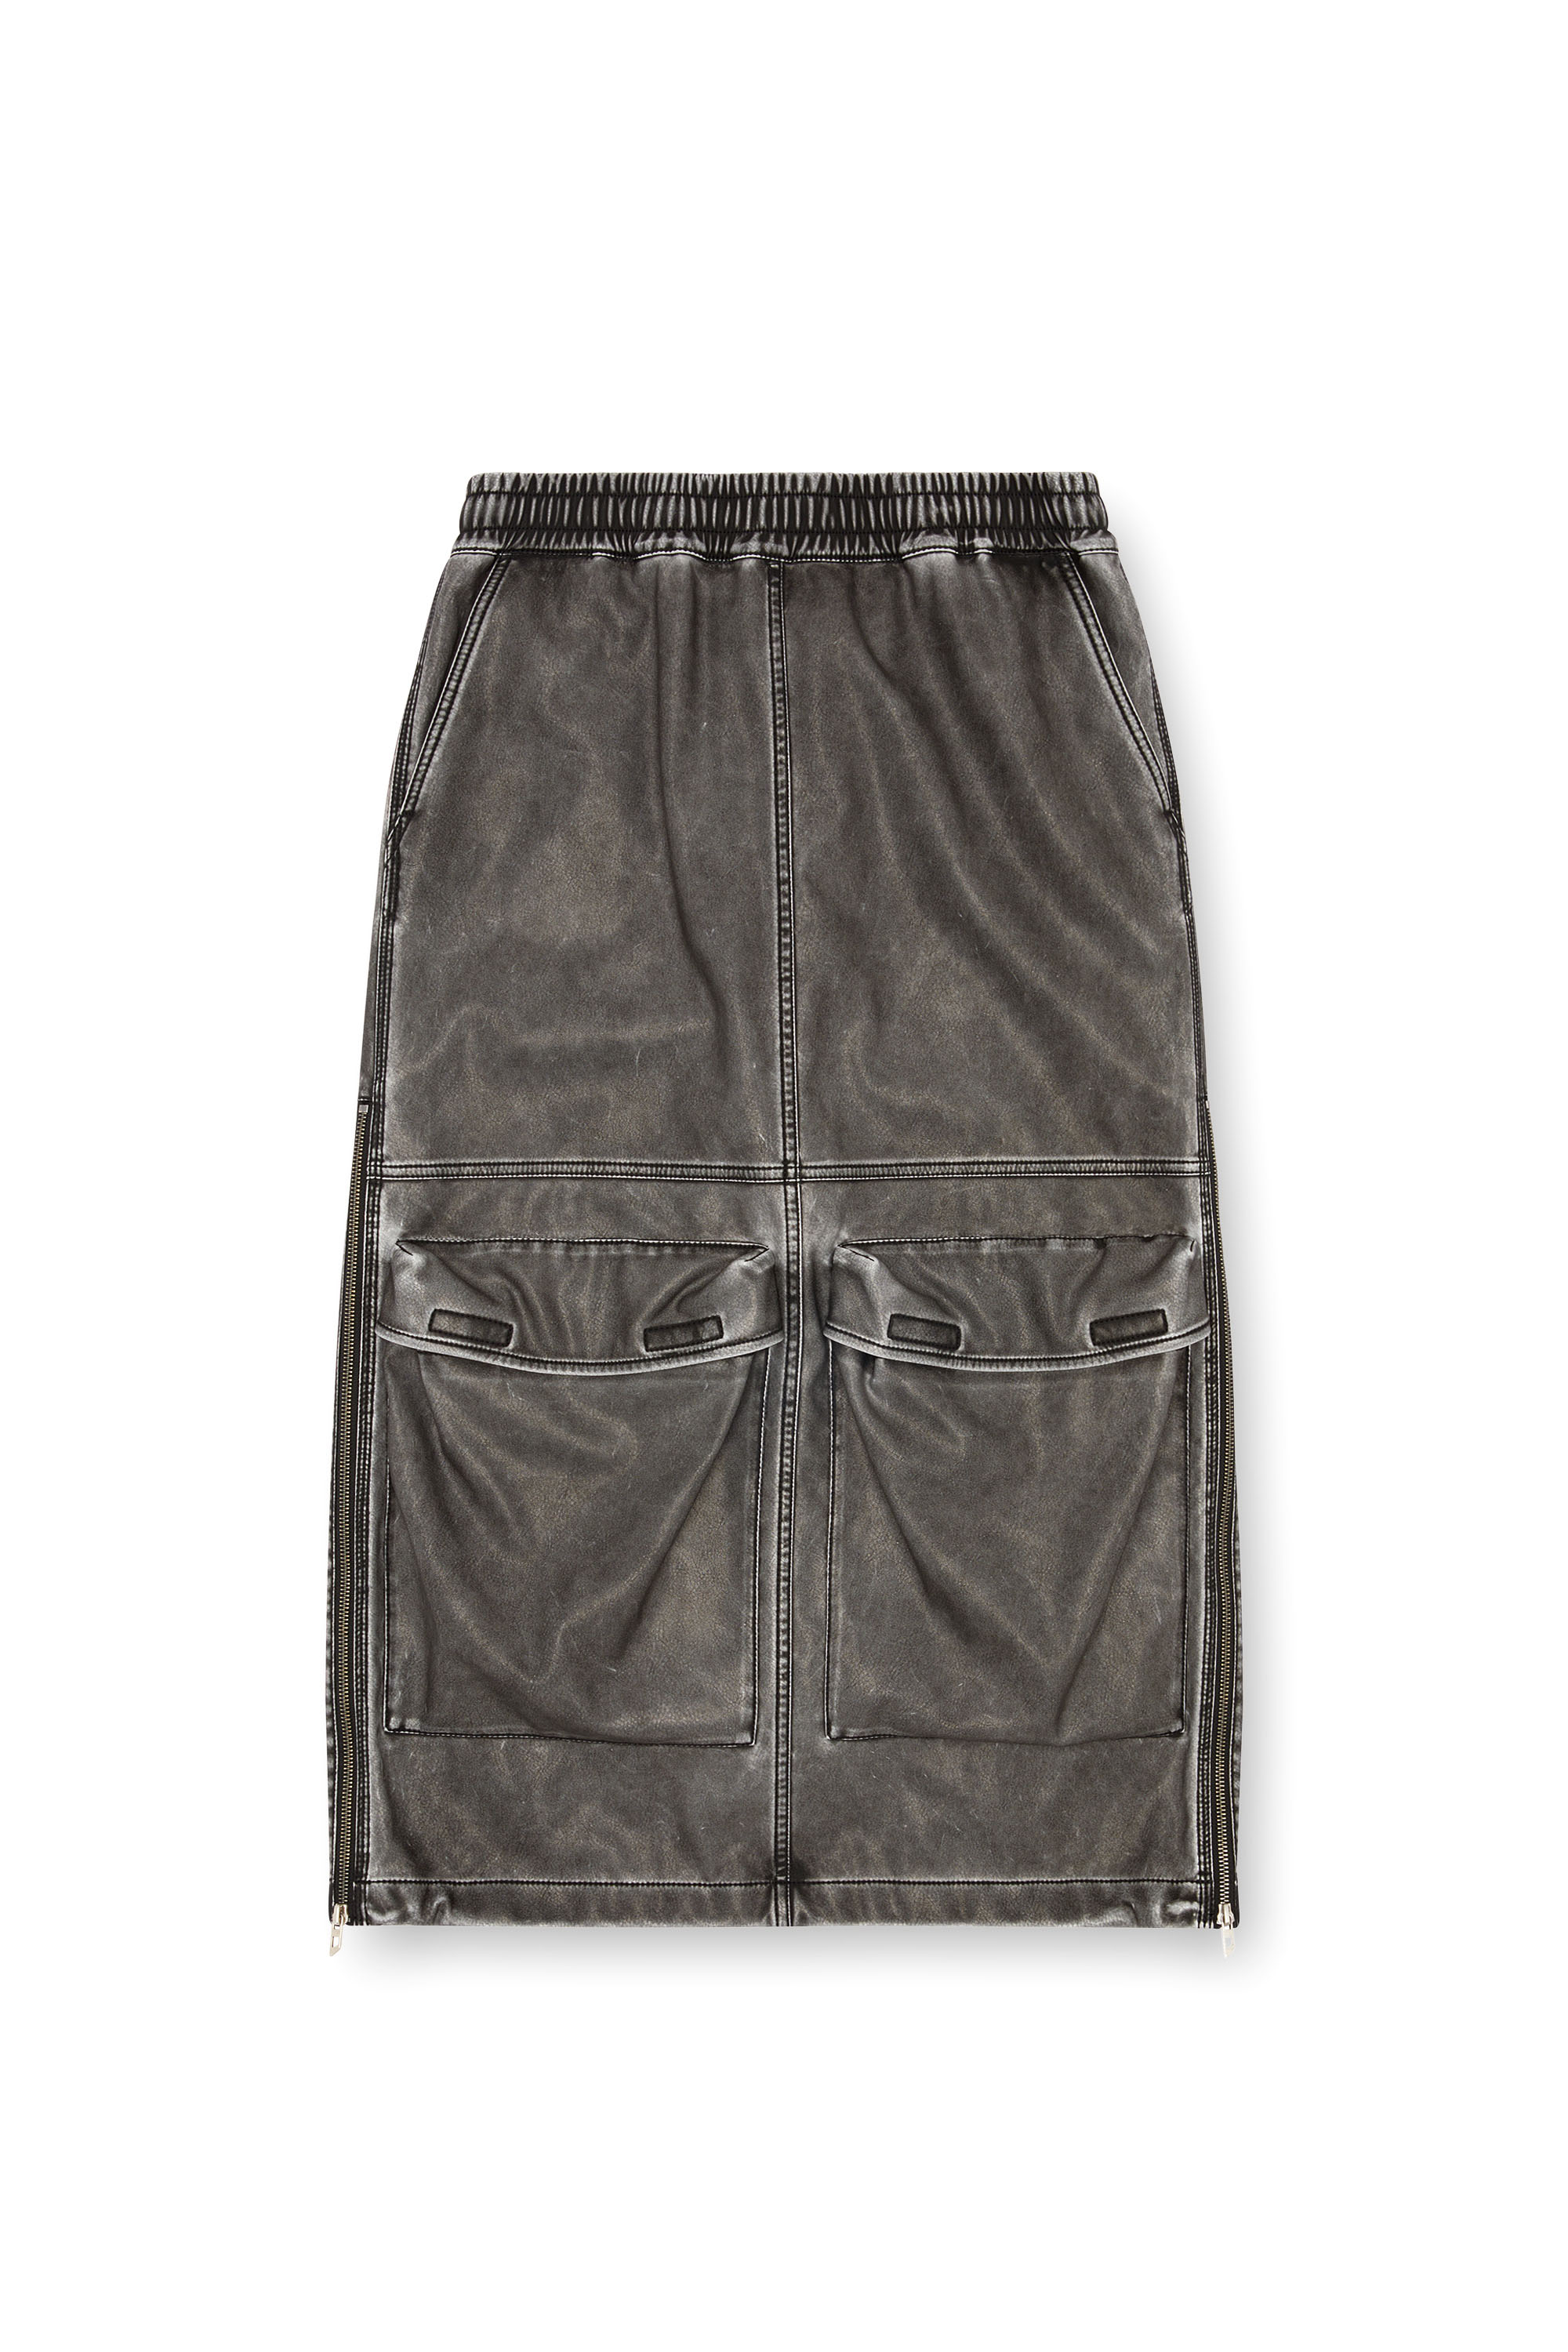 Diesel - O-DYSSEY-P1, Woman Long skirt in washed tech fabric in Grey - Image 3